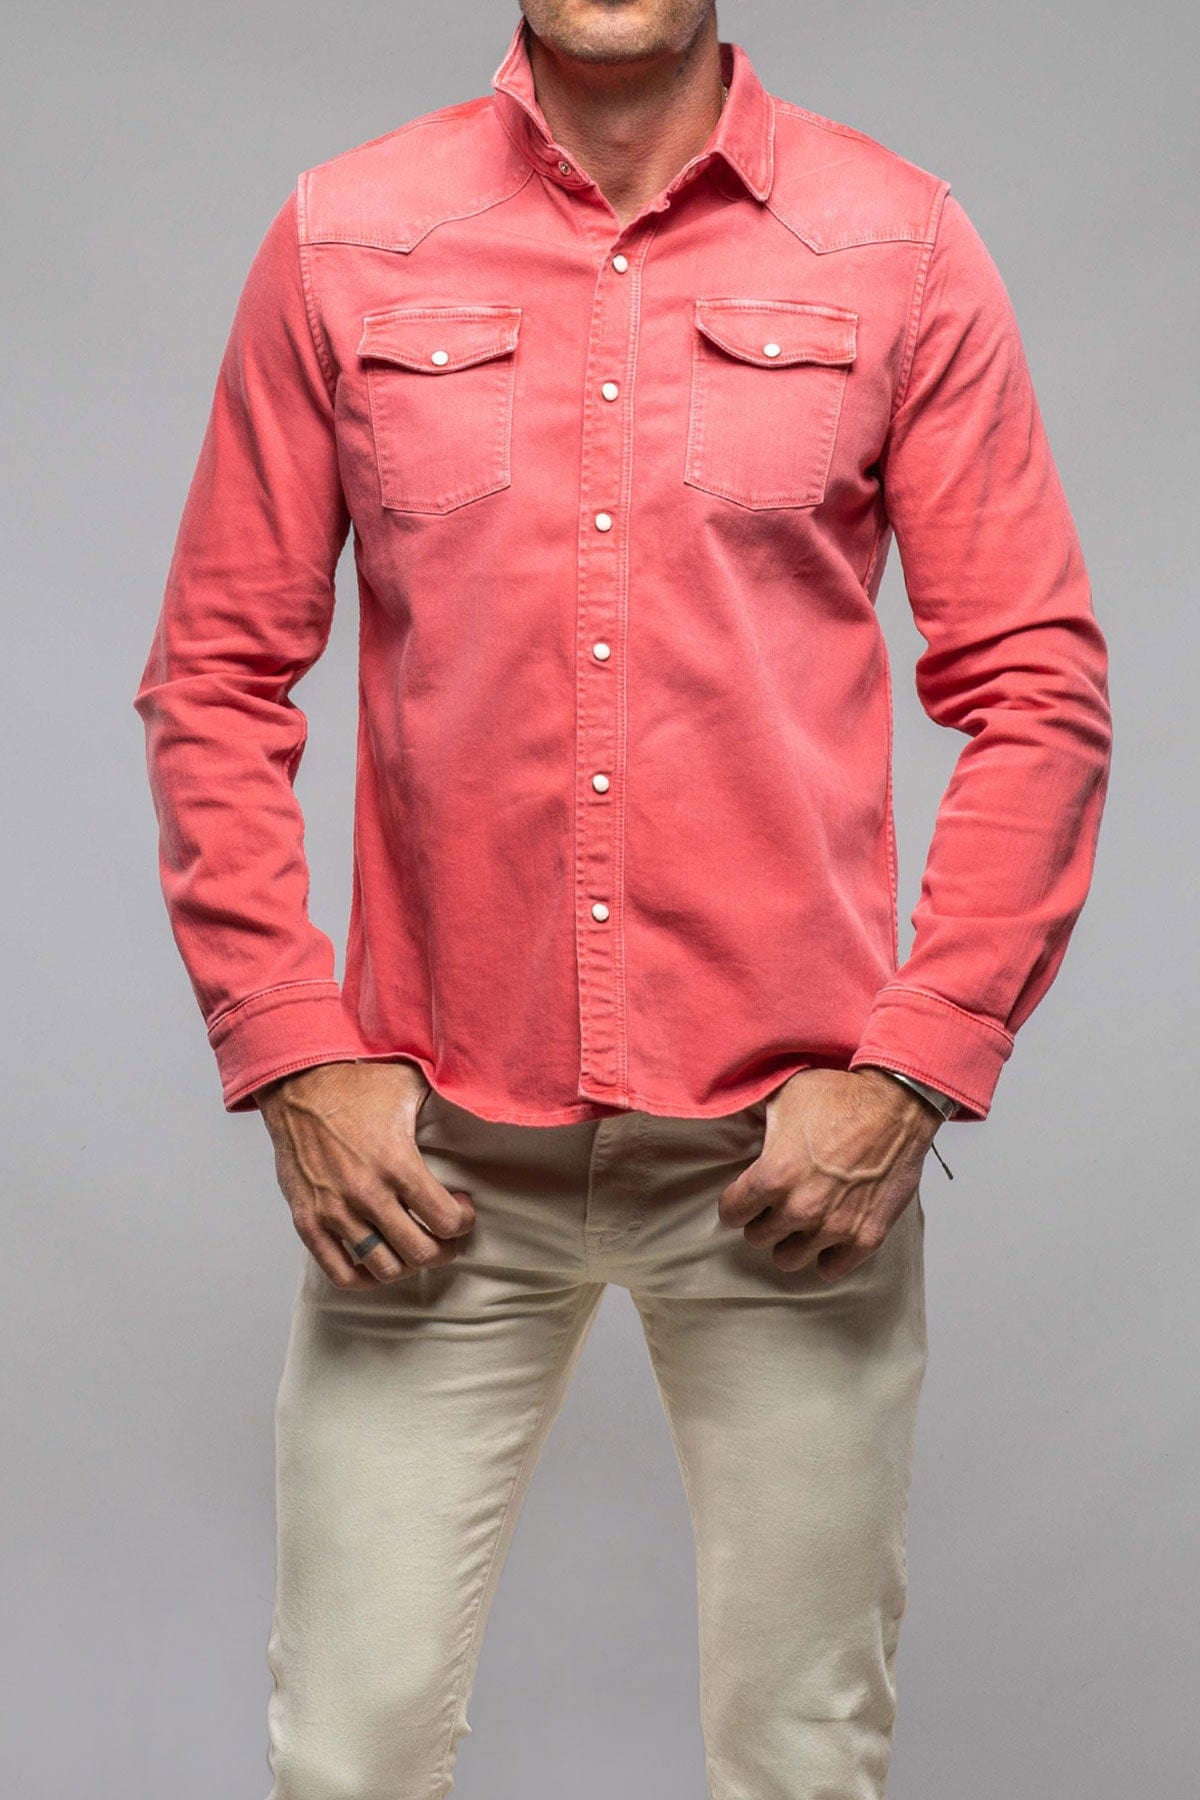 Ranger Colored Denim Snap Shirt In Washed Corallo - AXEL'S